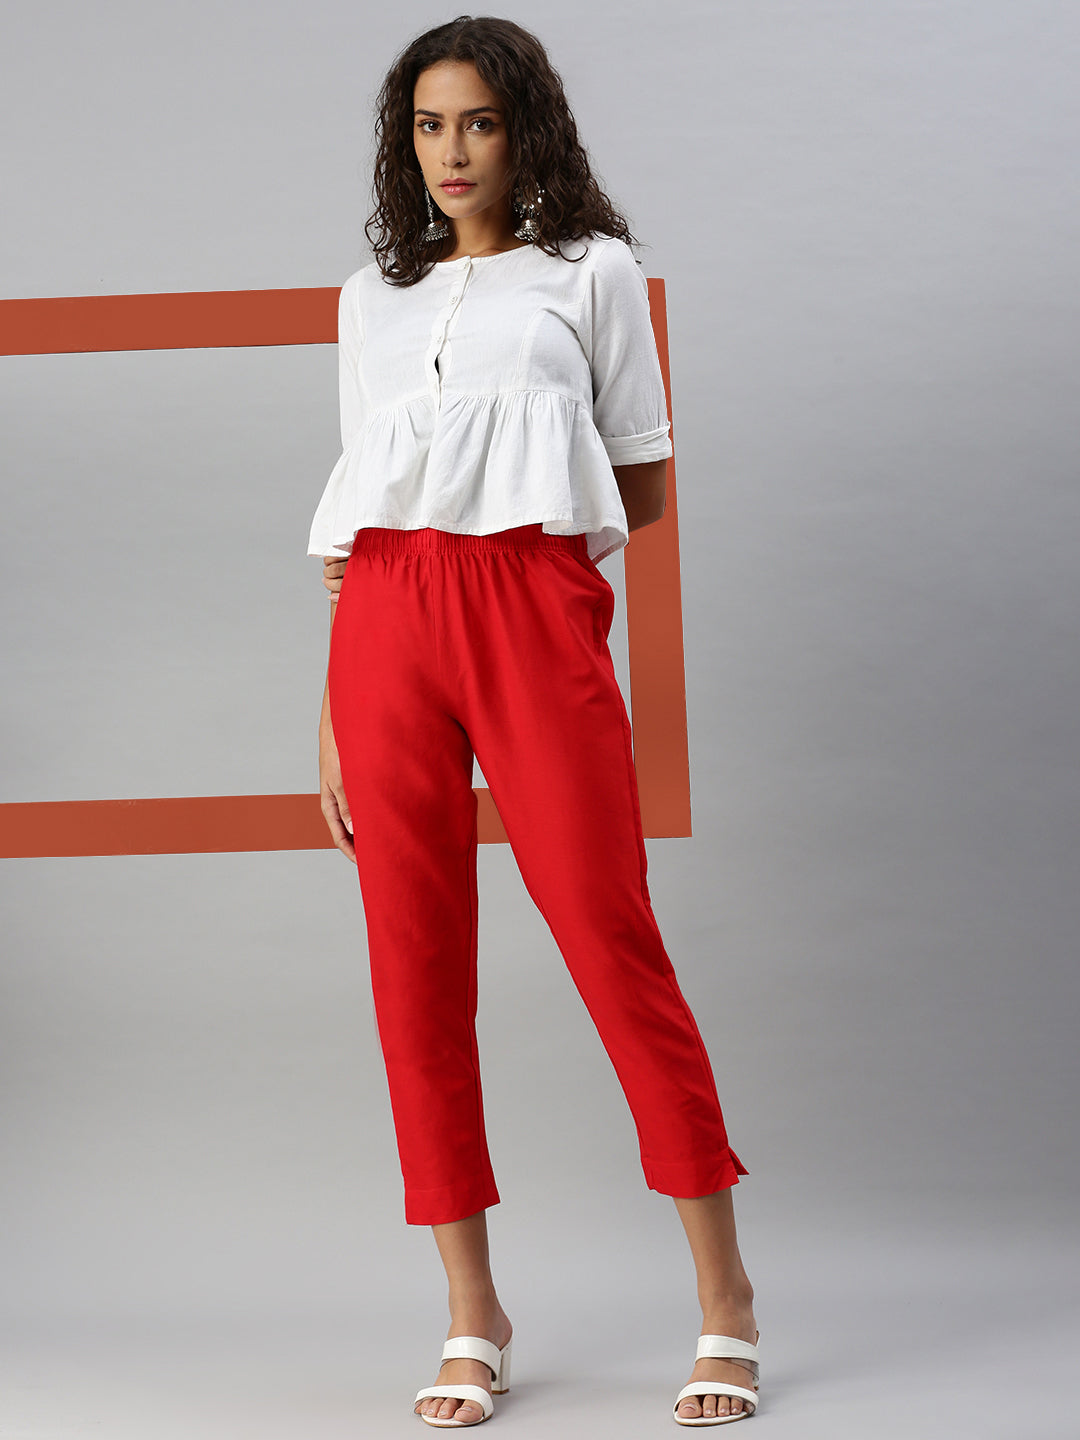 What To Wear With Red Pants Puzzle Solved